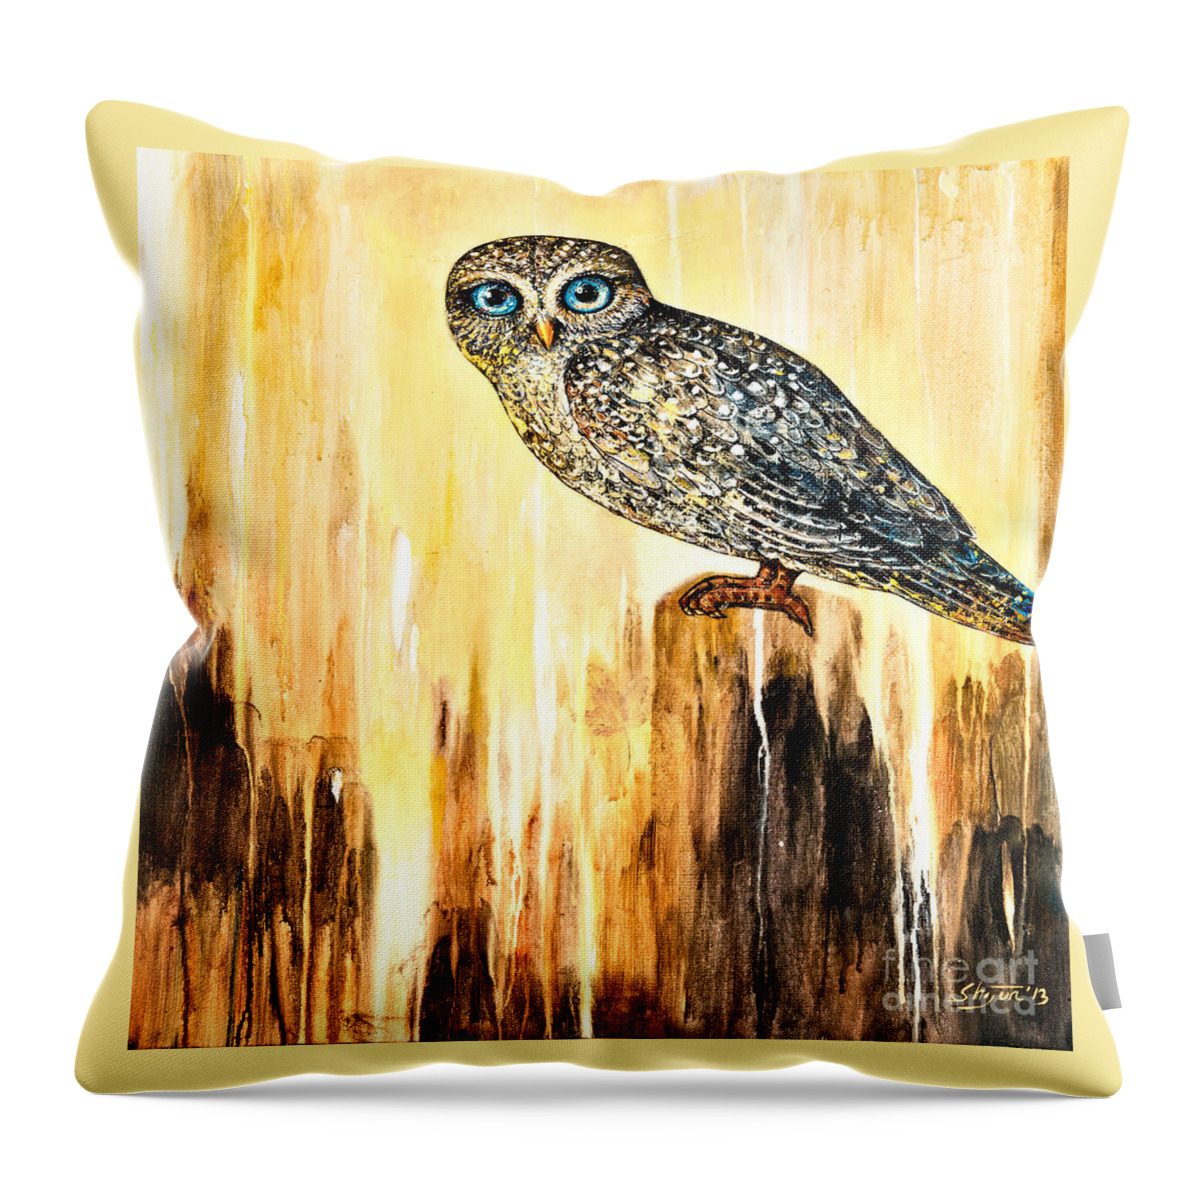 Owl Throw Pillow featuring the painting Blue Eyed Owl by Shijun Munns